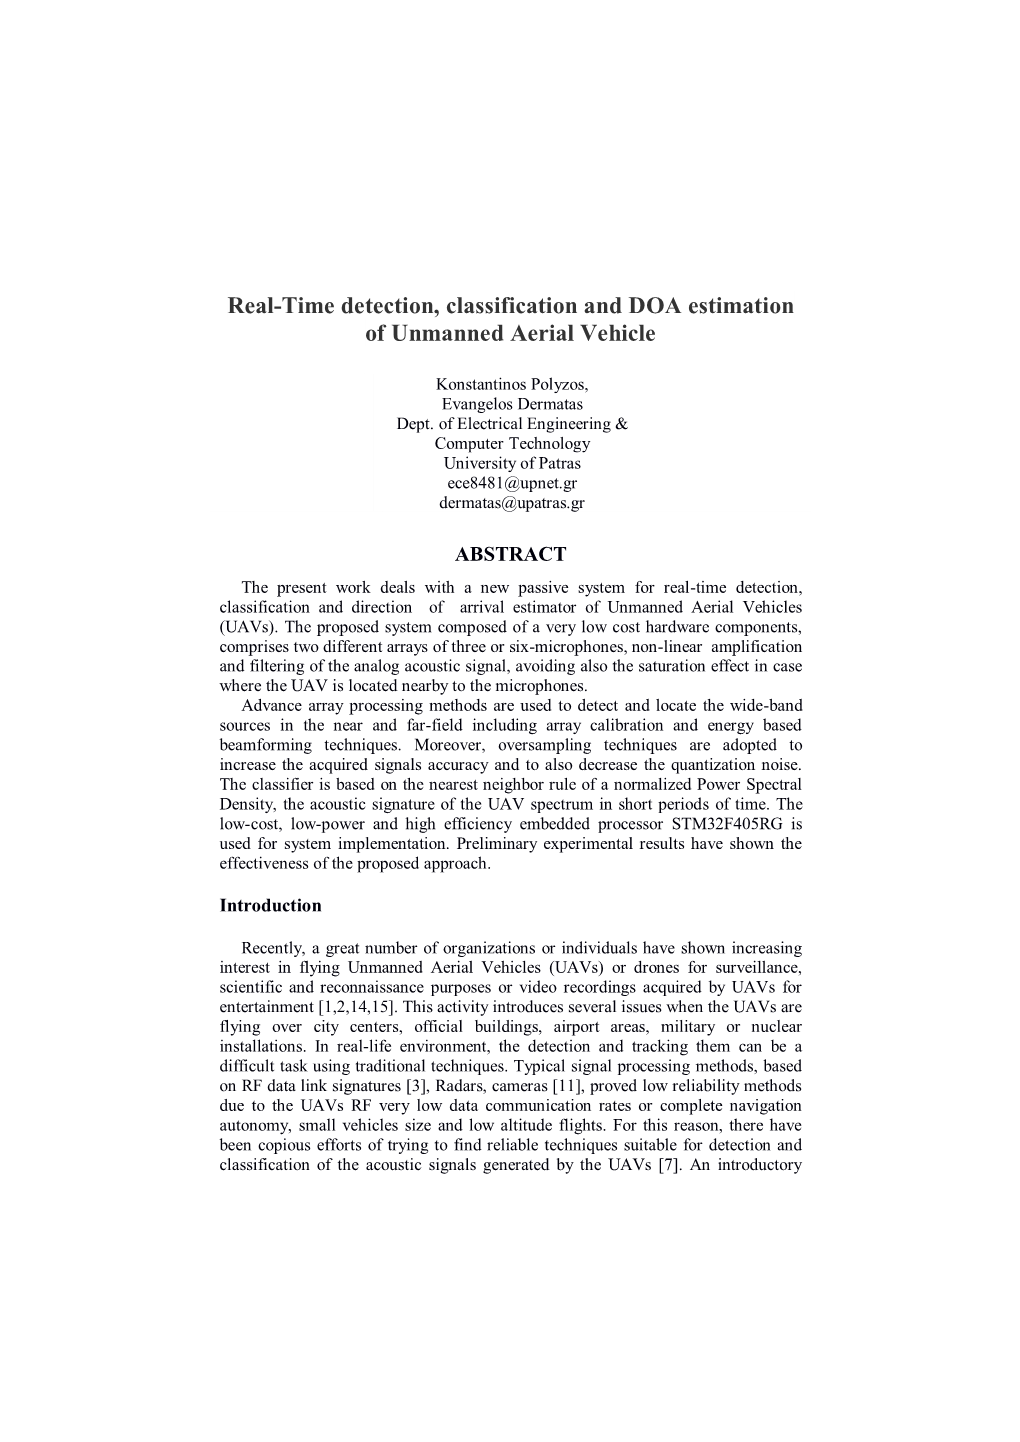 Real-Time Detection, Classification and DOA Estimation of Unmanned Aerial Vehicle